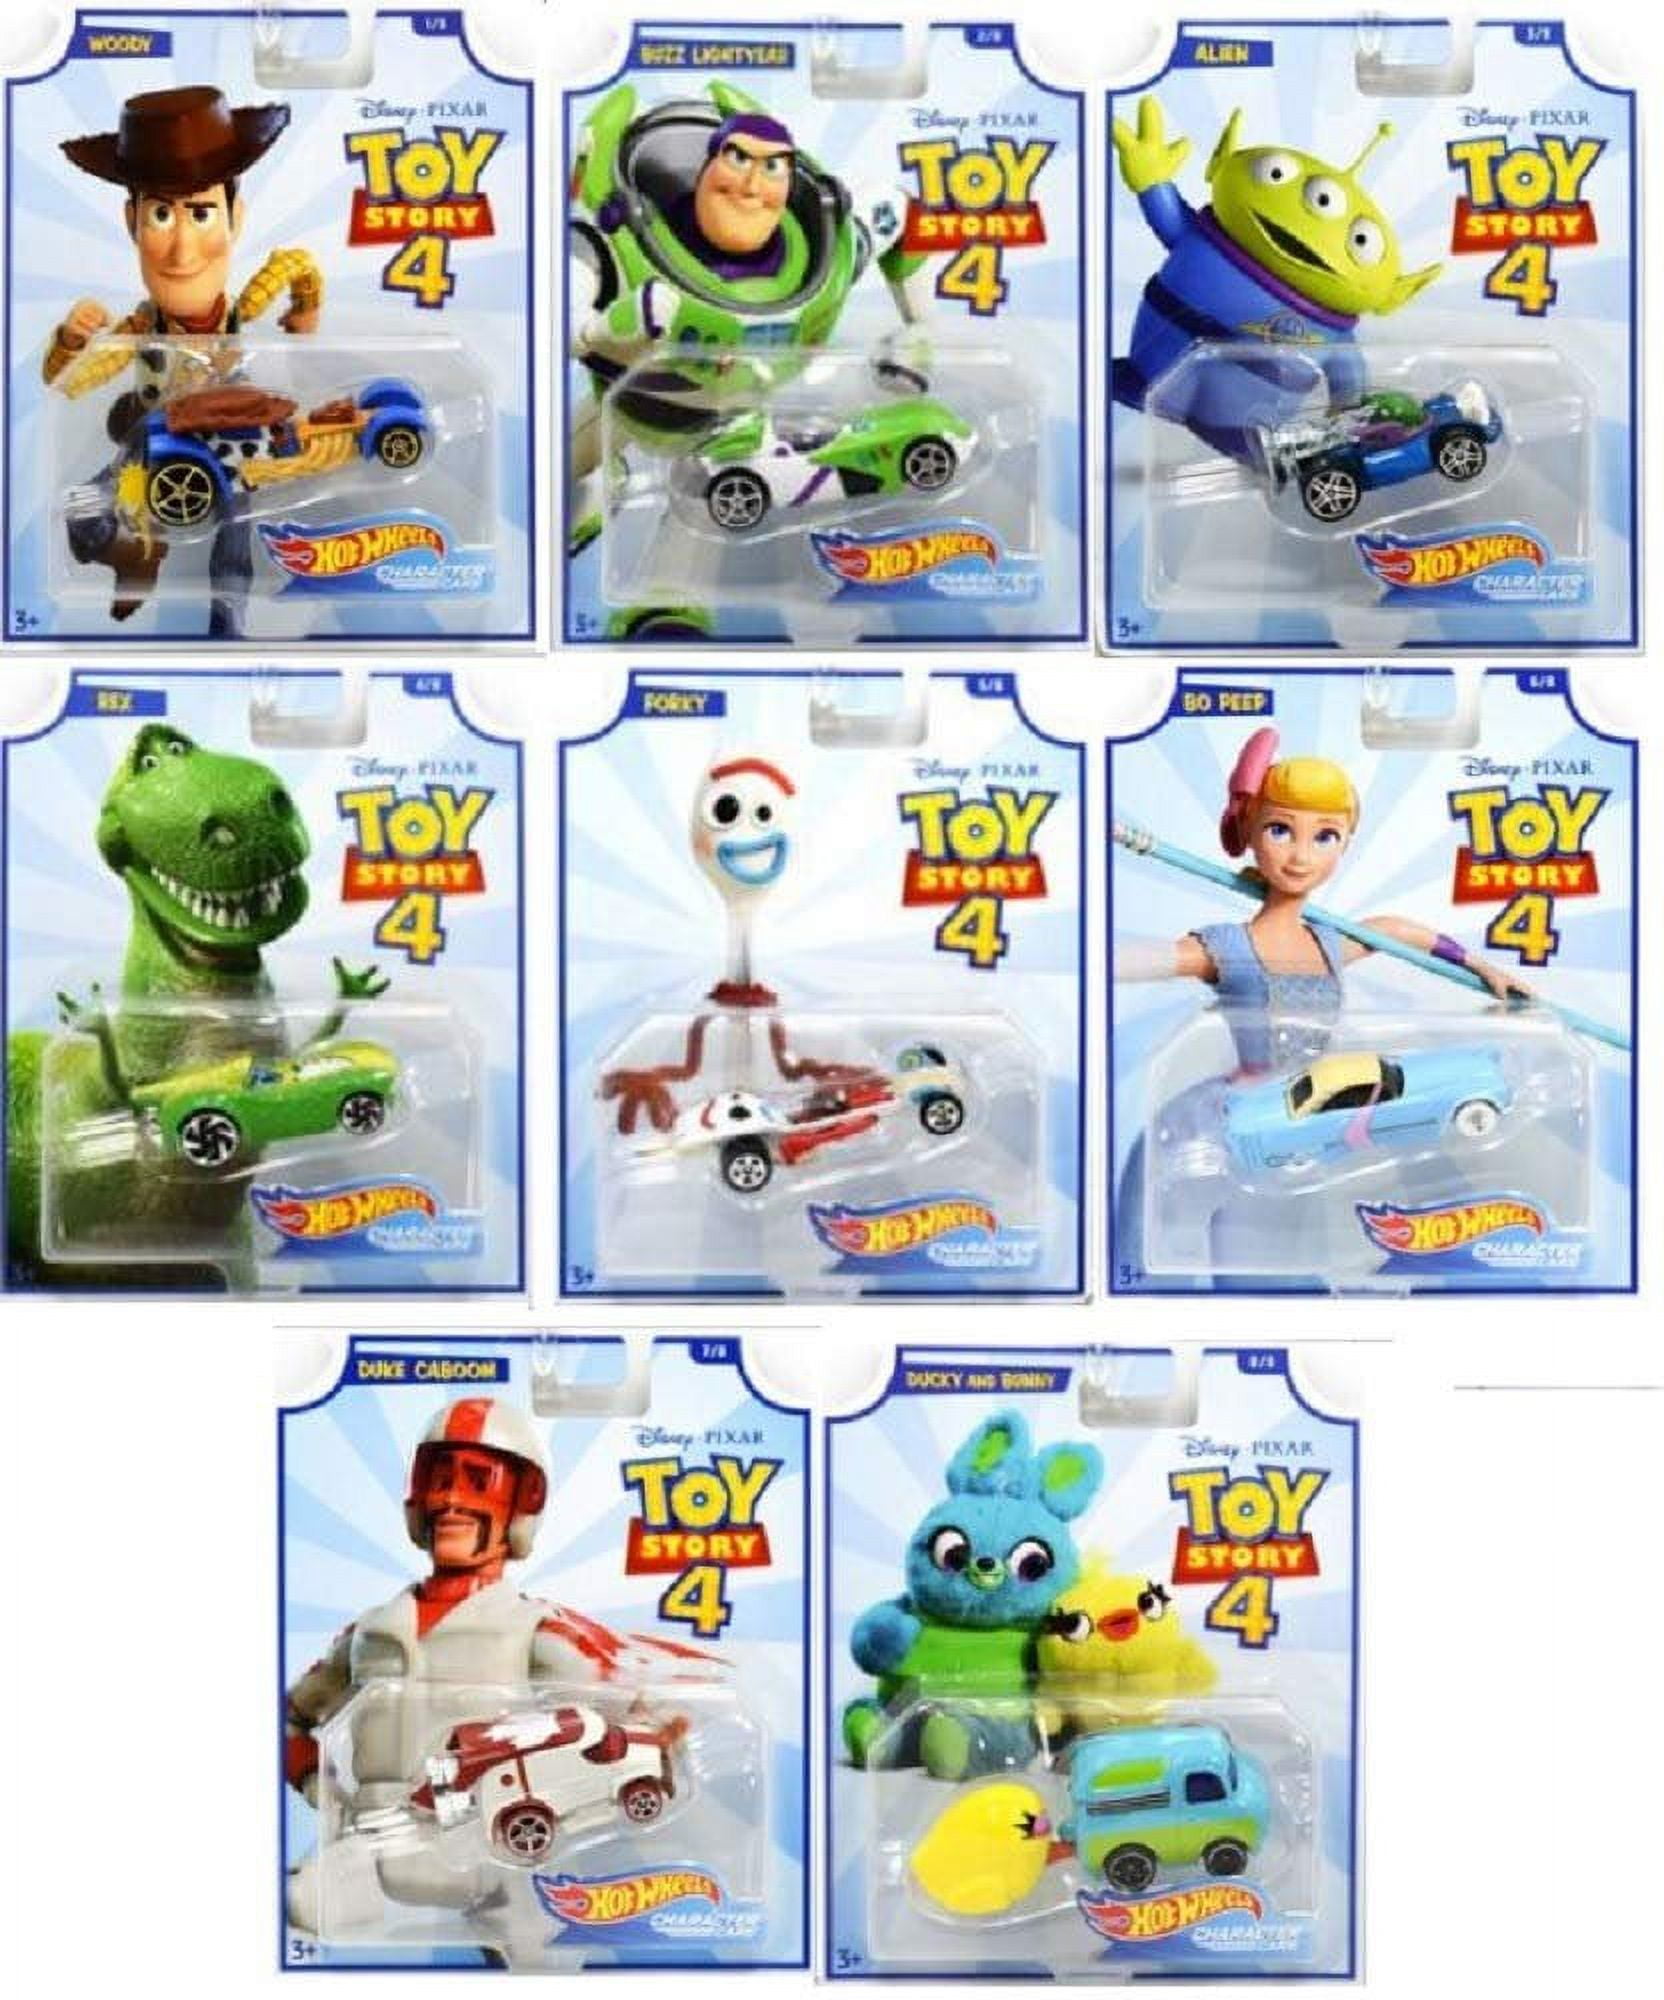 Exclusive photos of Pixar's new Toy Story 4 characters